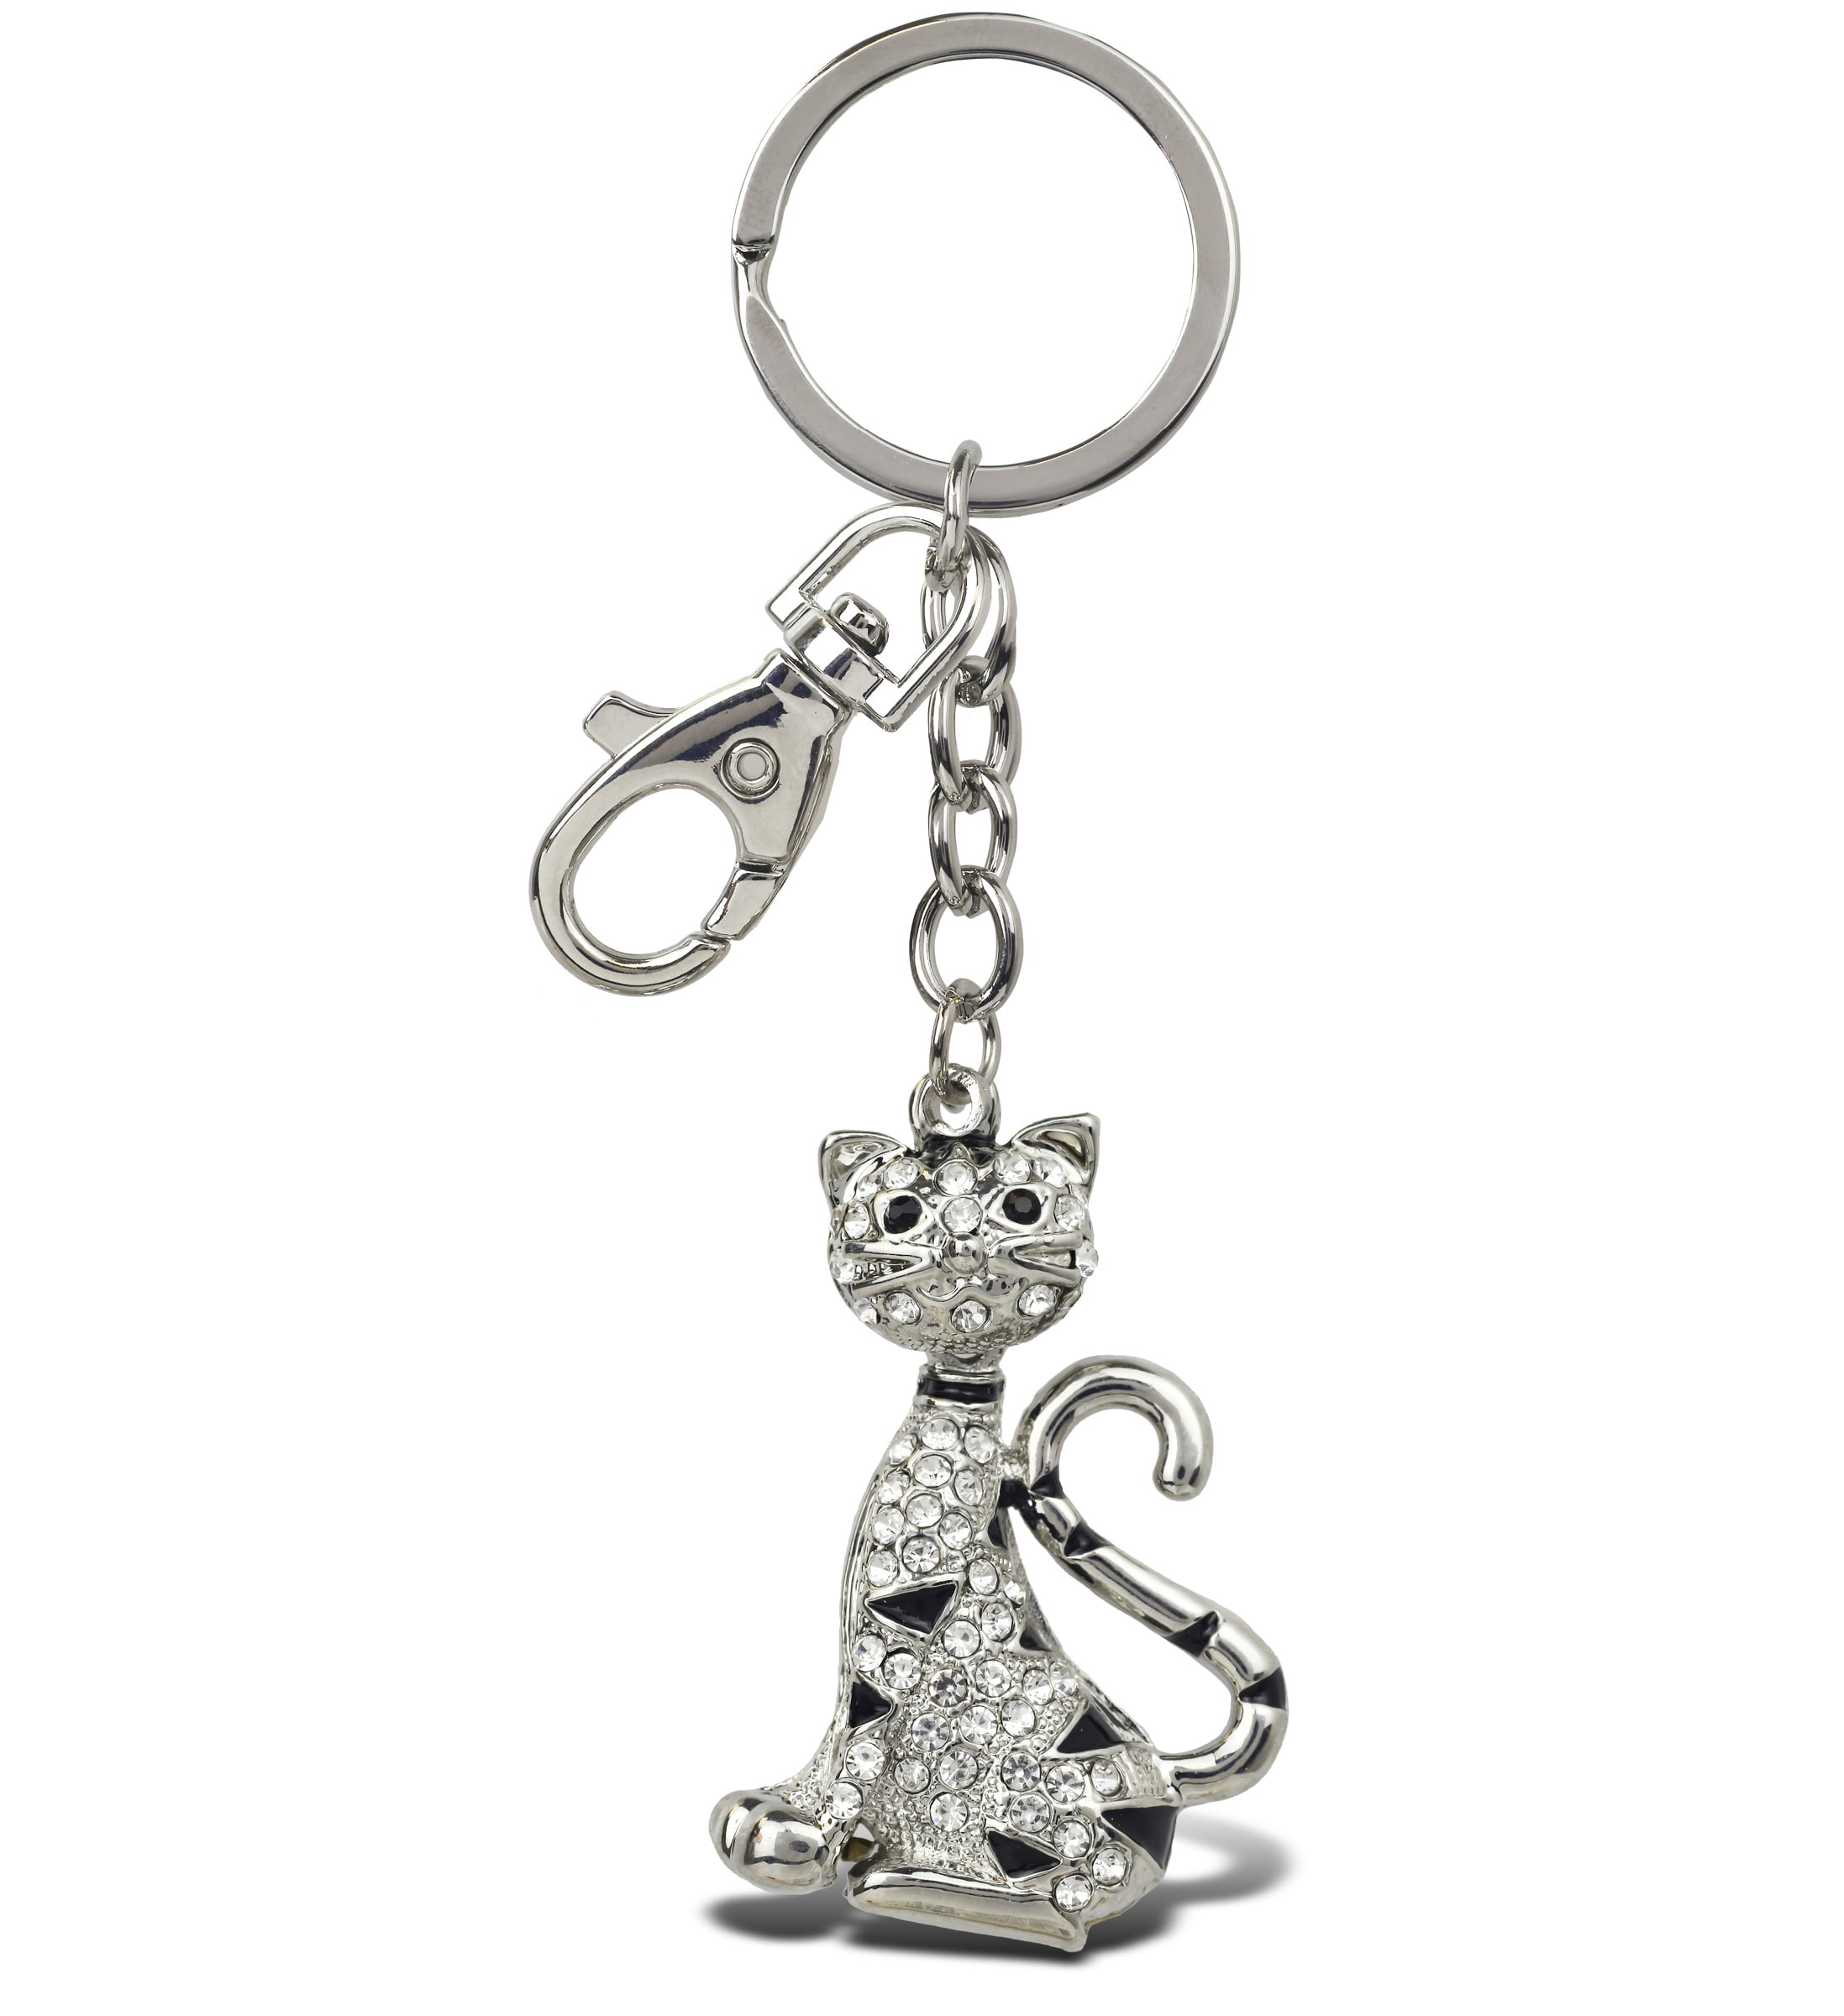 Aqua79 Cats Sparkling Silver Keychains Set of 4 – Pink, Happy, Blue Tiger,  Stylish Cat Charm Rhinestones, Silver Metal Key Ring – Accessory with Clasp  for Key Chain, Bag, Purse, Handbag, Backpack 